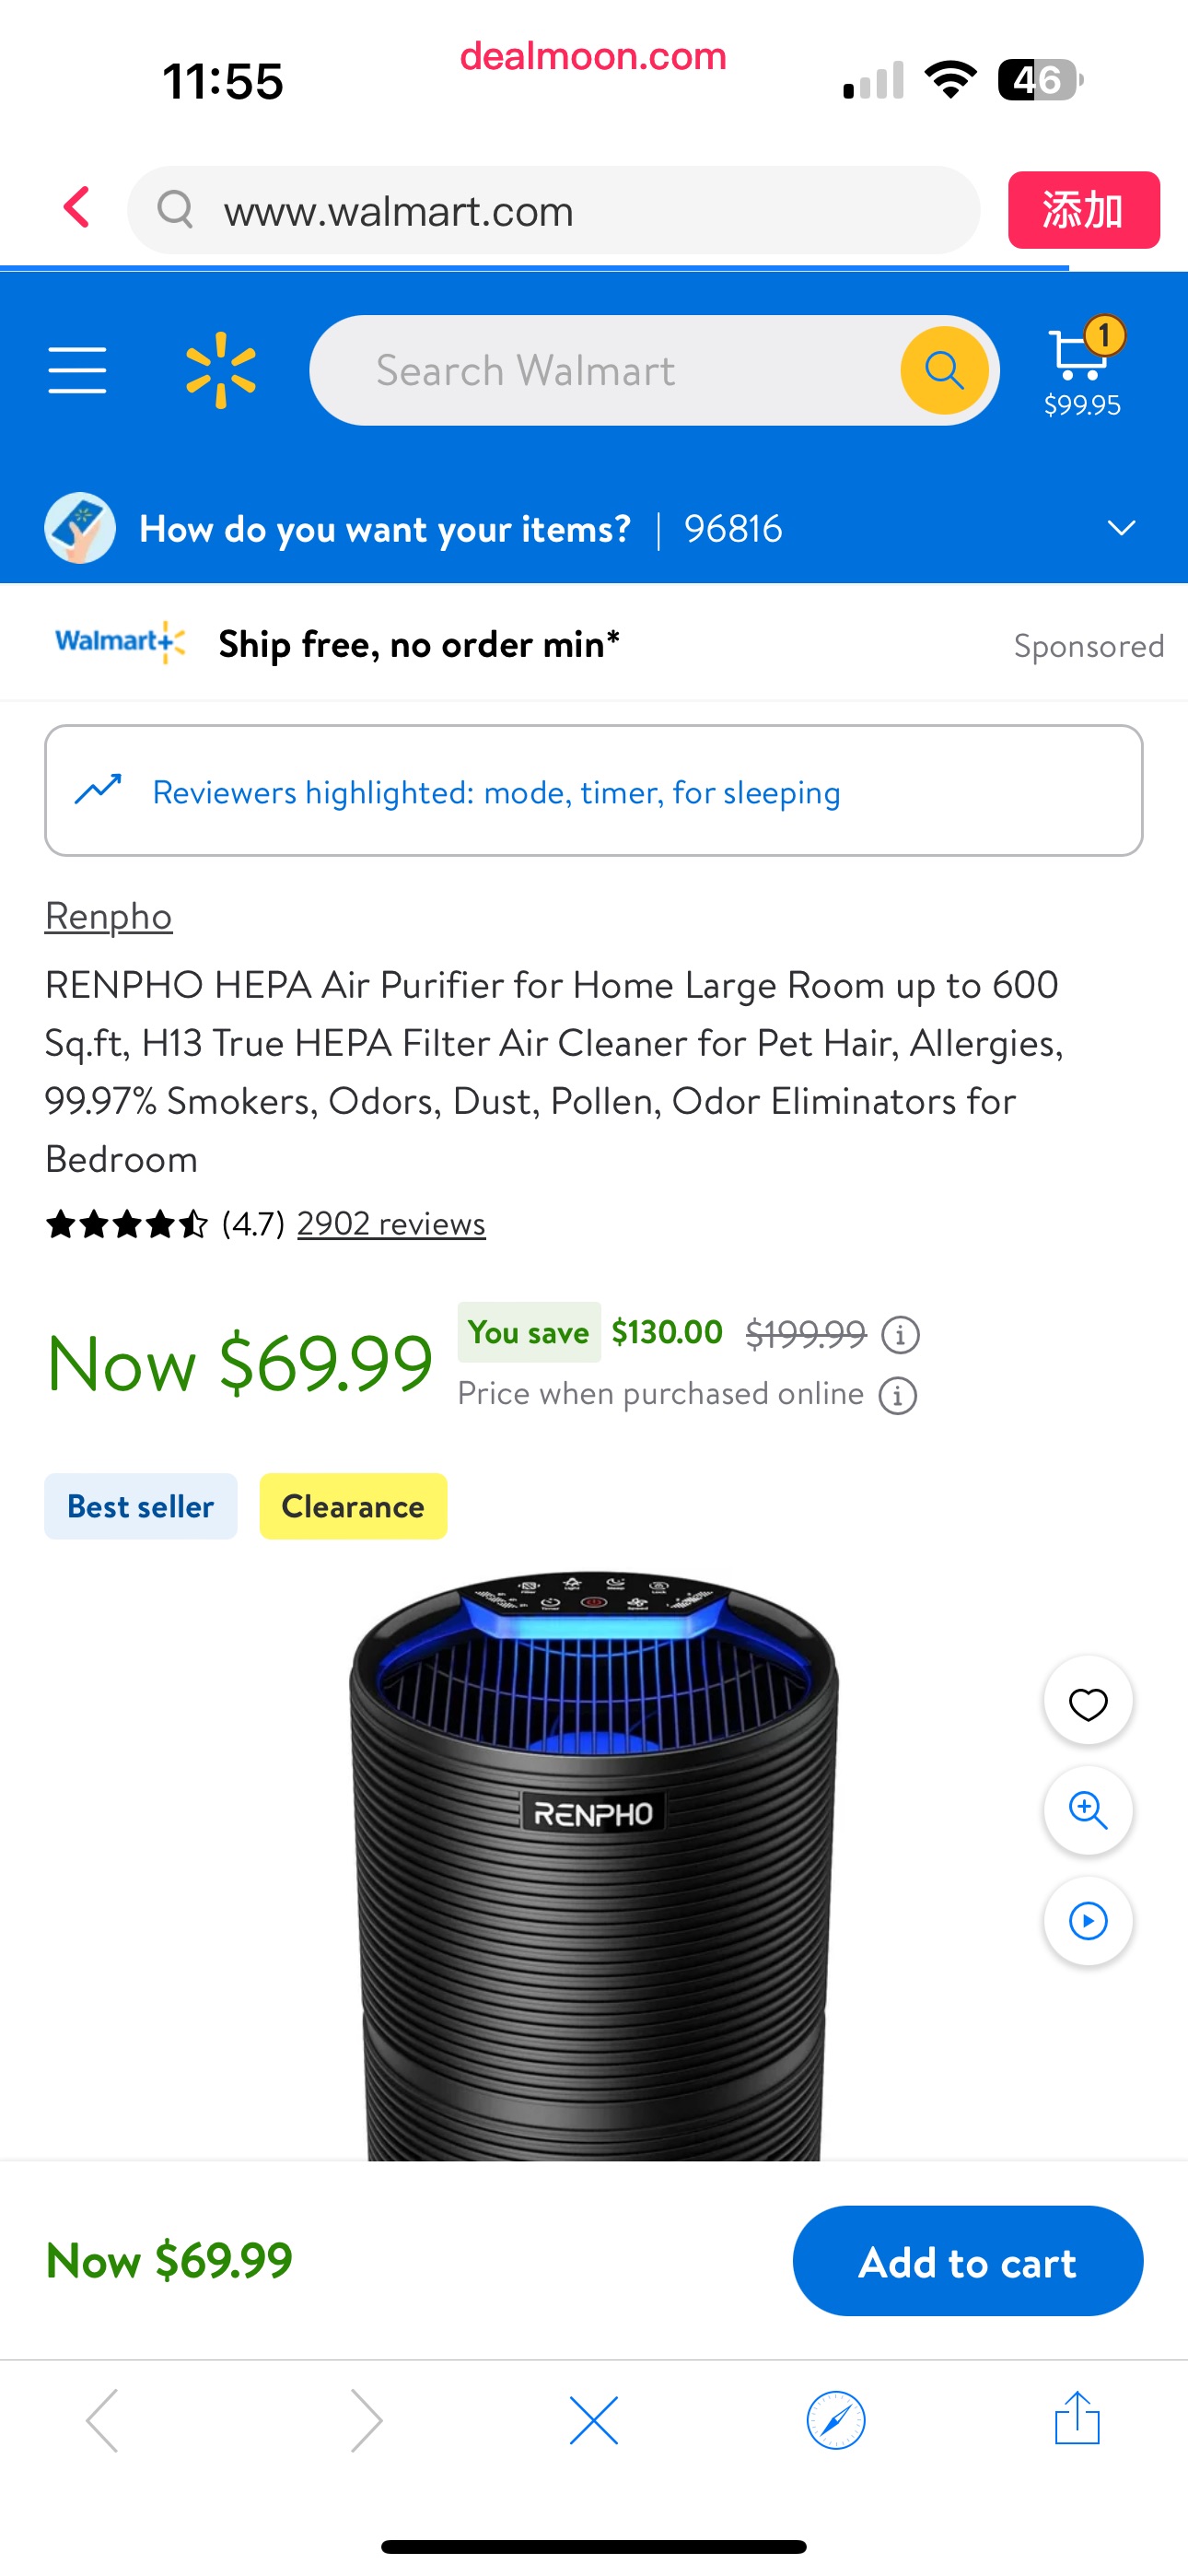 RENPHO HEPA Air Purifier for Home Large Room up to 600 Sq.ft, H13 True HEPA Filter Air Cleaner for Pet Hair, Allergies, 99.97% Smokers, Odors, Dust, Pollen, Odor Eliminators for Bedroom - Walmart.com空